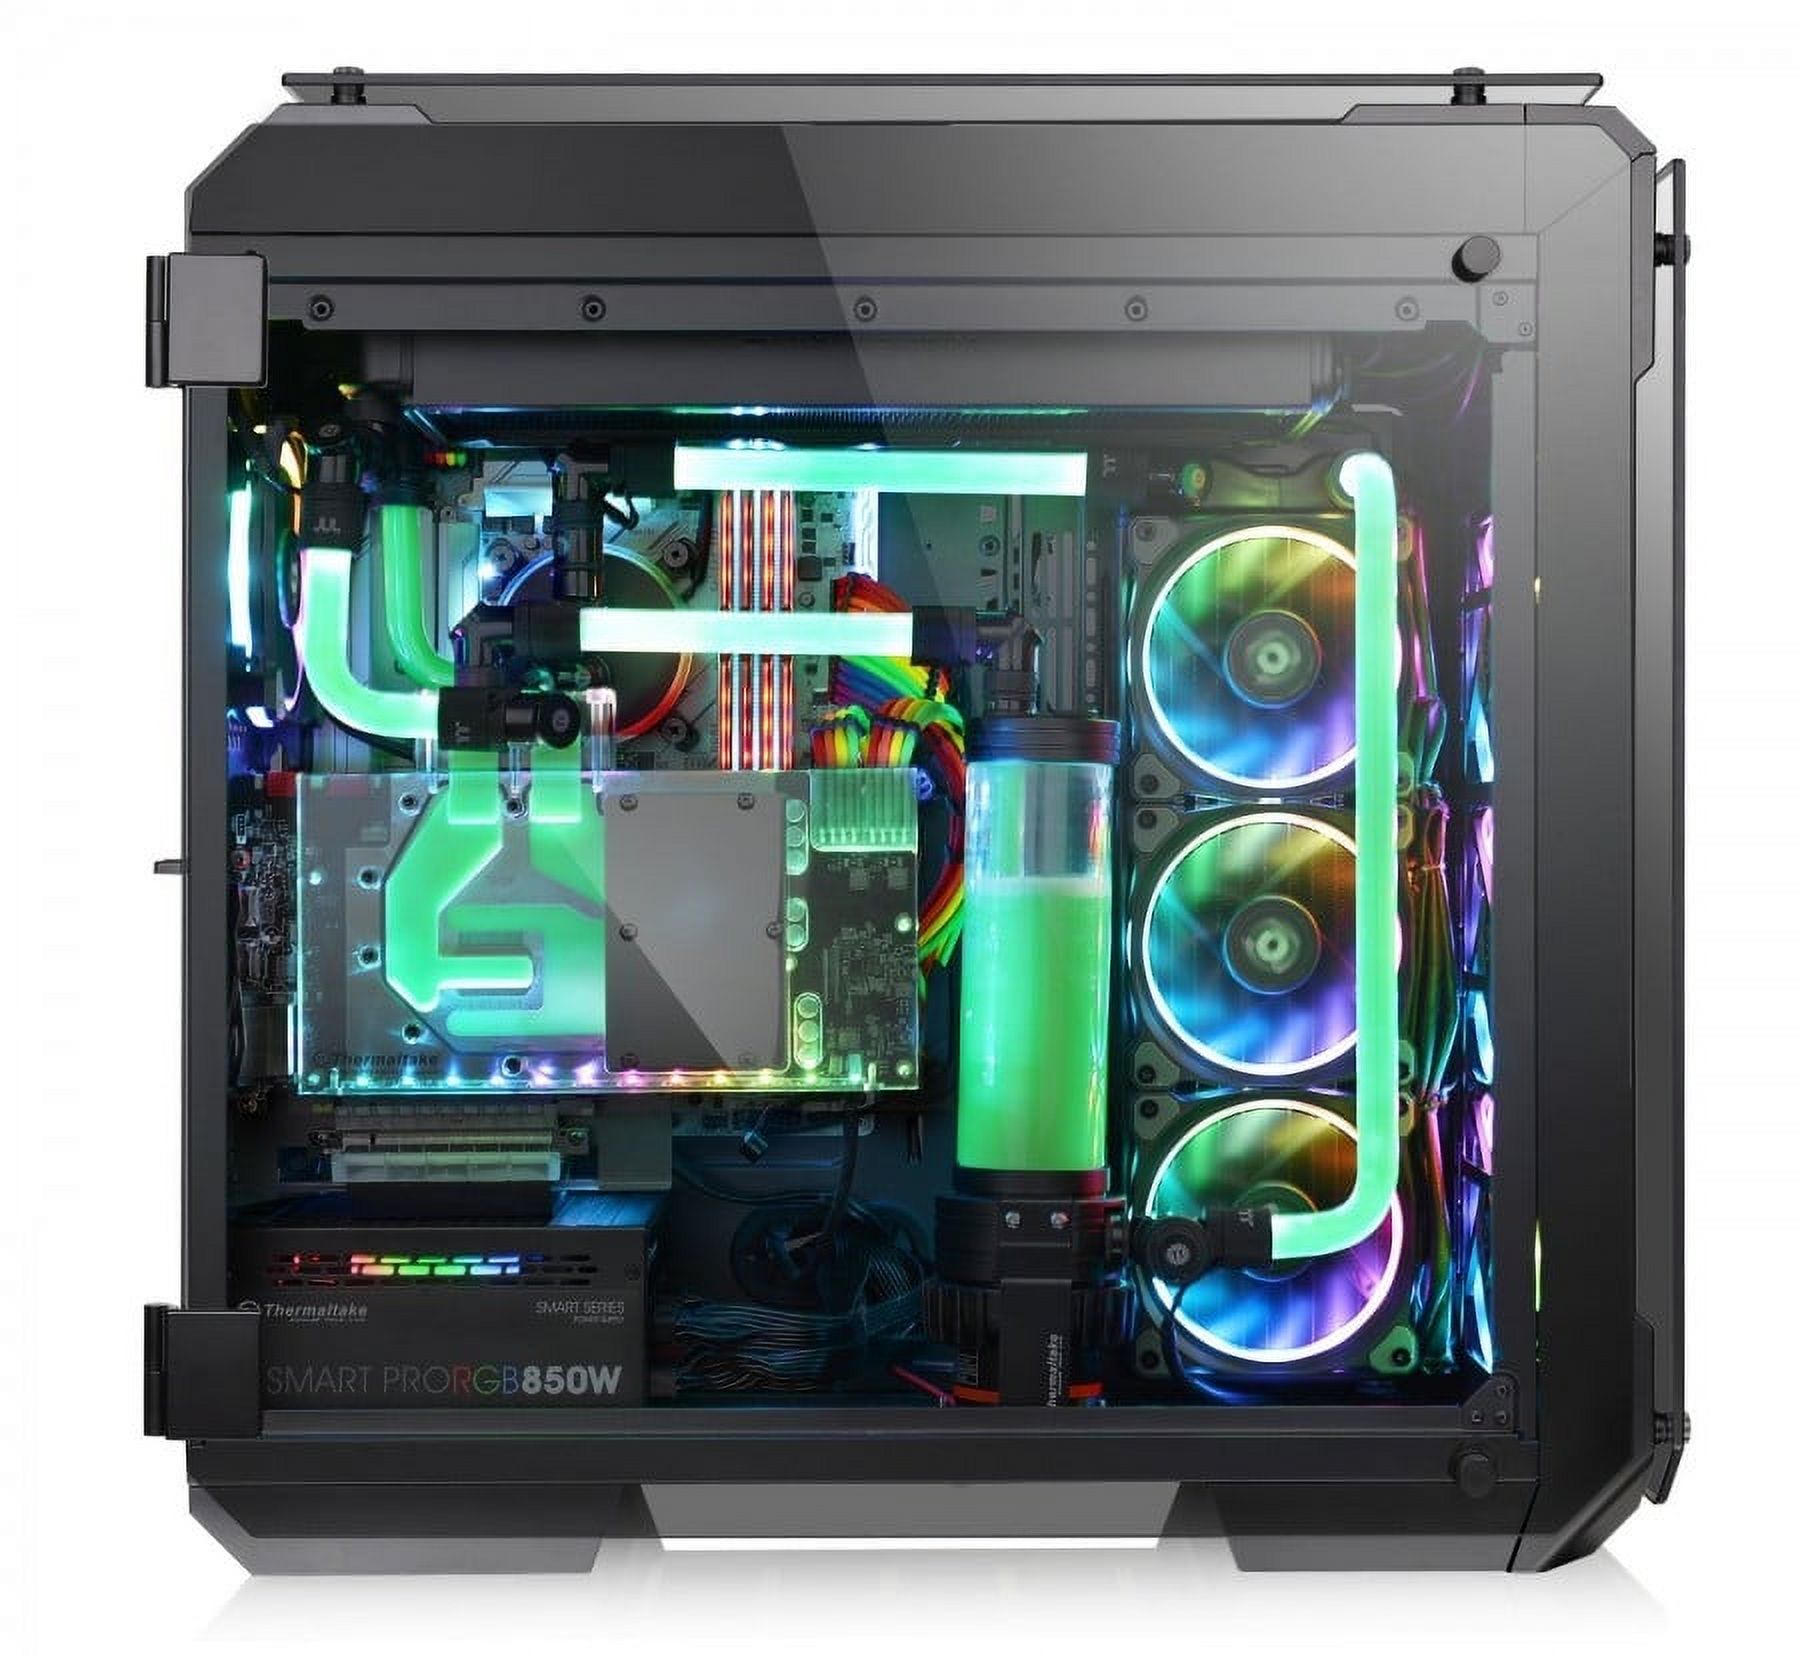 Thermaltake View 71 E-ATX Full Tower Computer Case - Black. - image 5 of 5